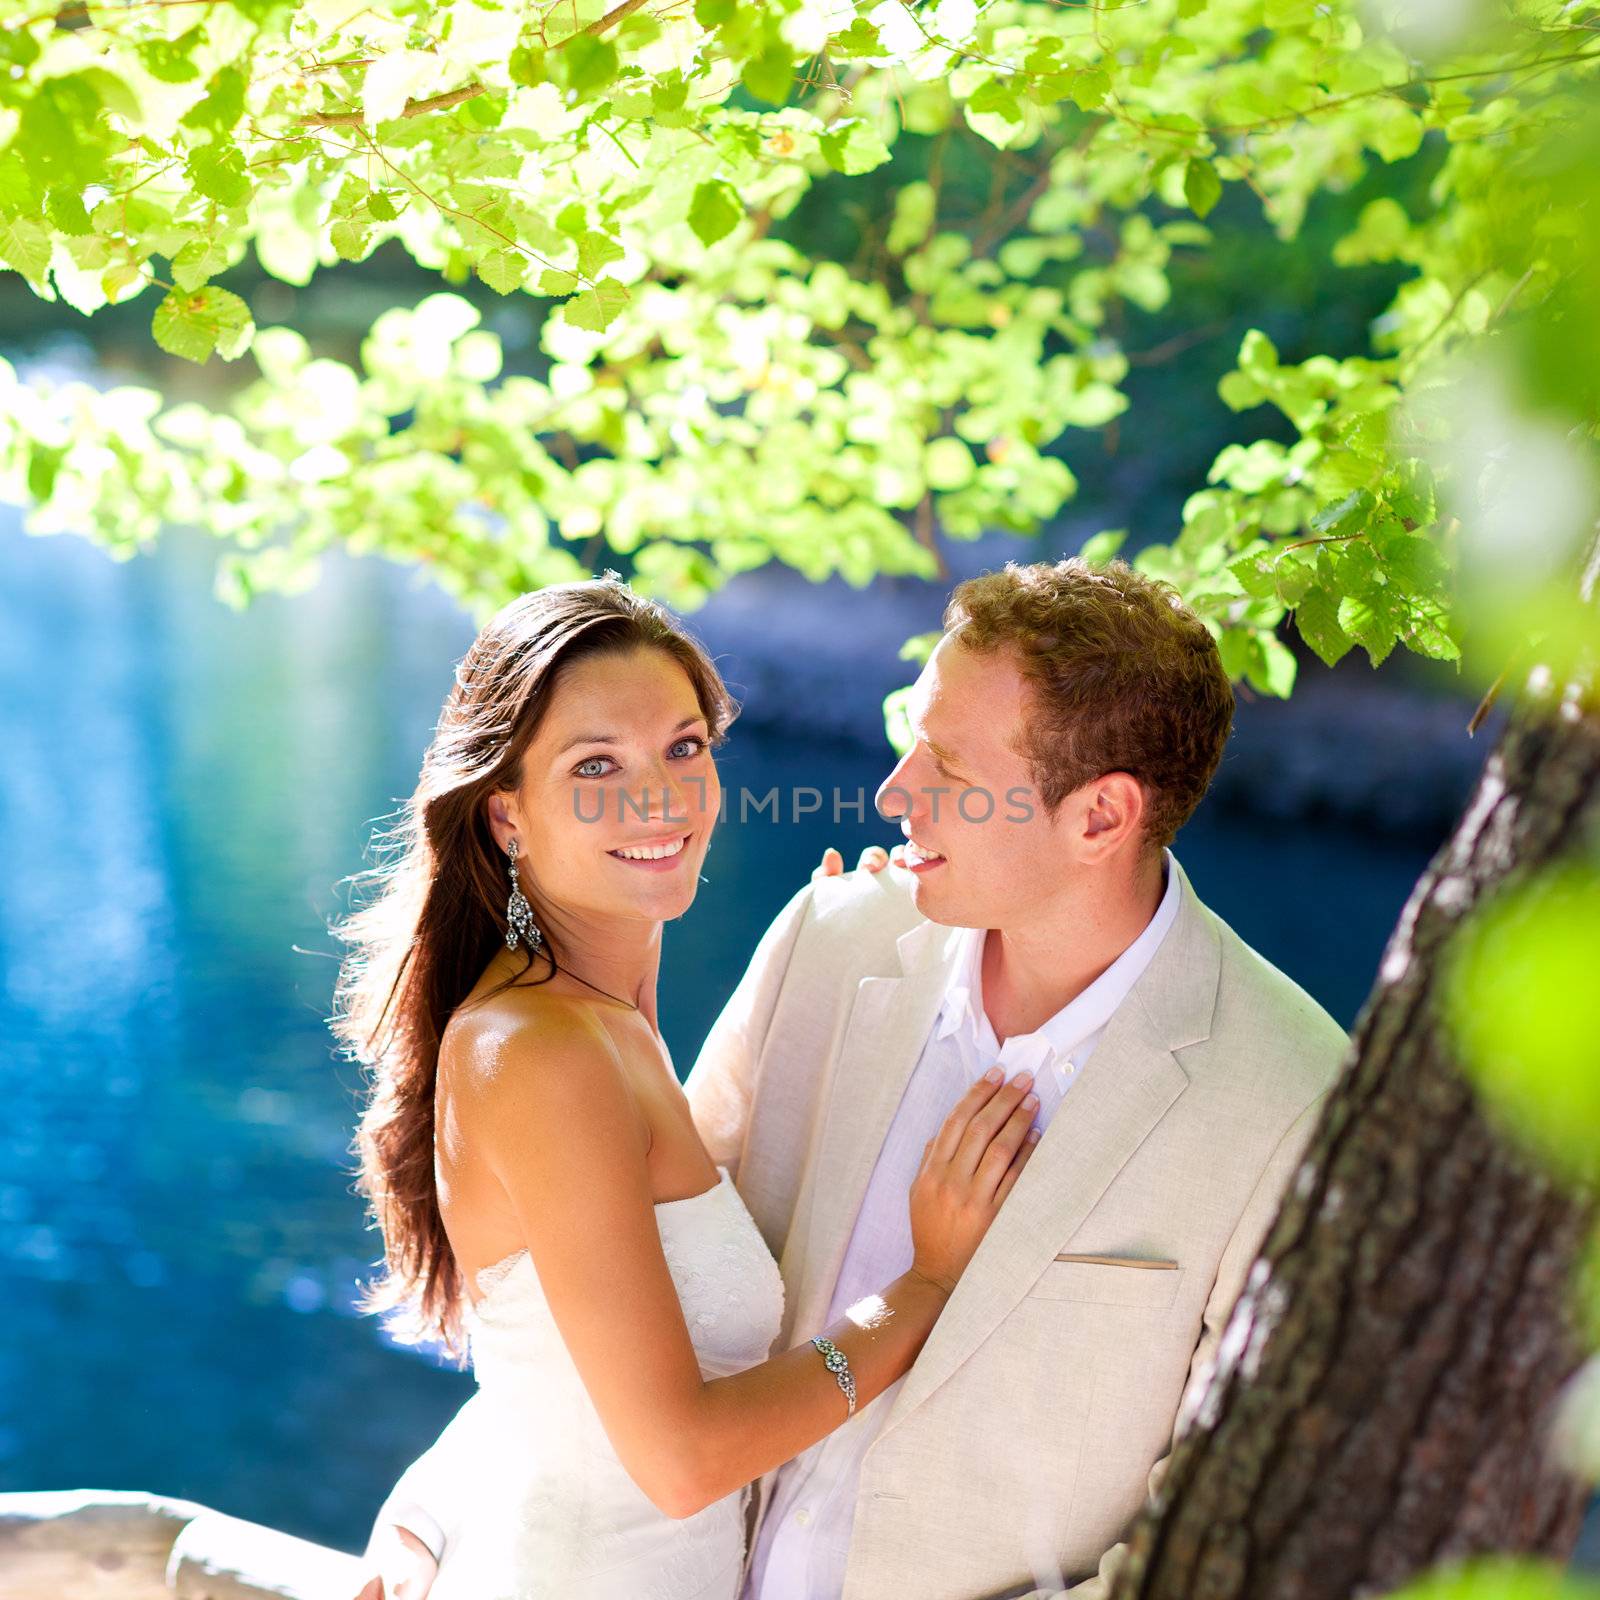 couple in love hug in forest tree blue lake outdoors